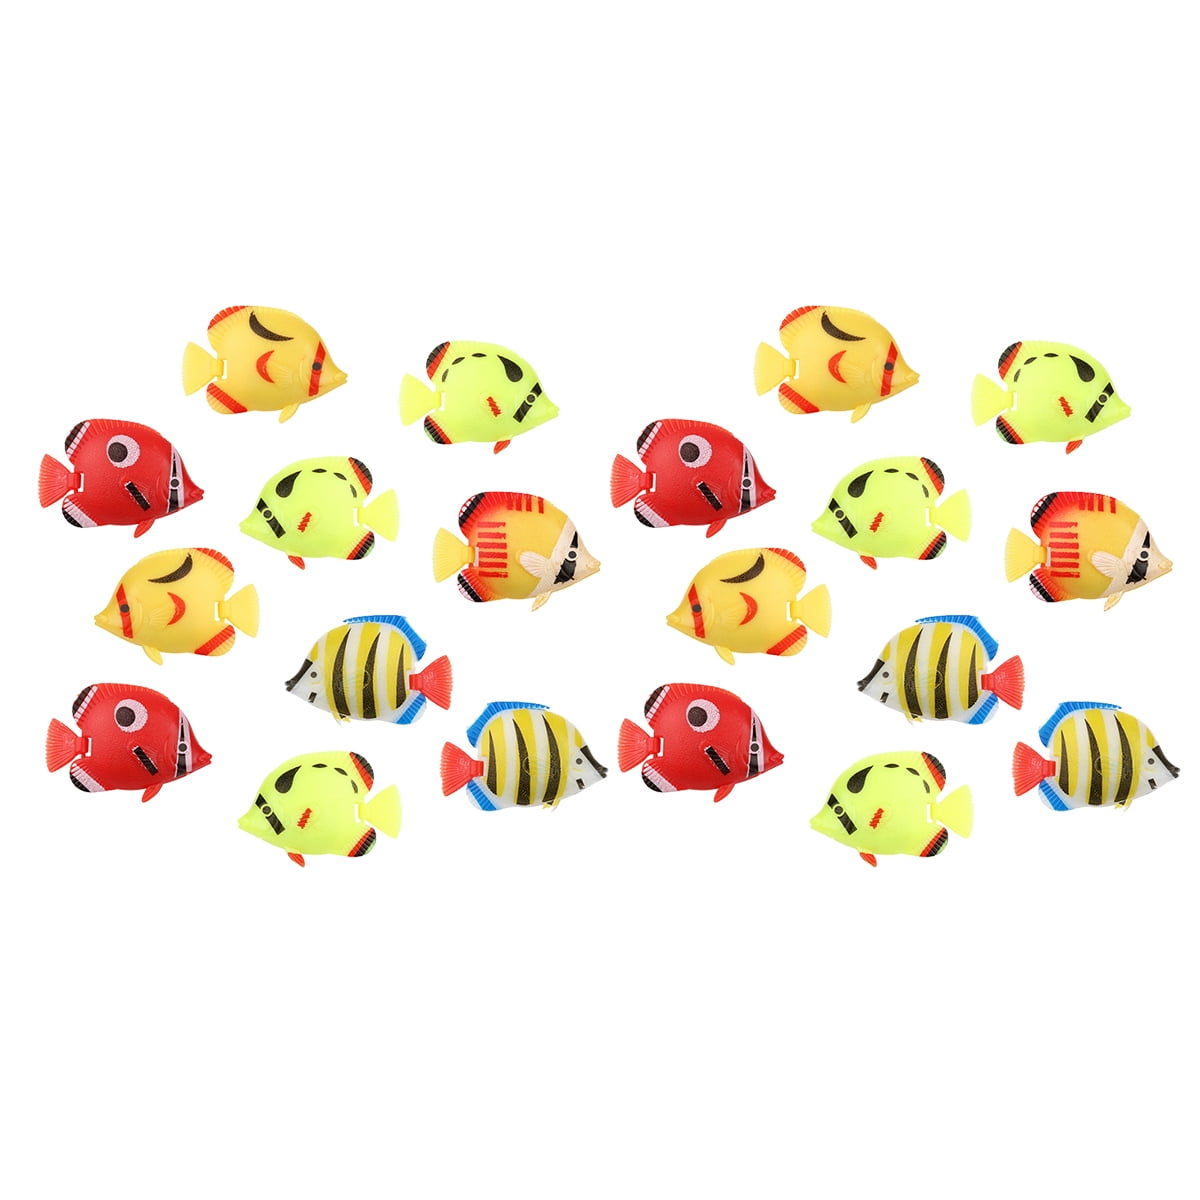 Brewish Artificial Lifelike Plastic Fish for Aquarium Tank Decorations Ornaments Random Pattern Moving Floating Fishes Figurines Toy for Swimming in Bubble Tube 